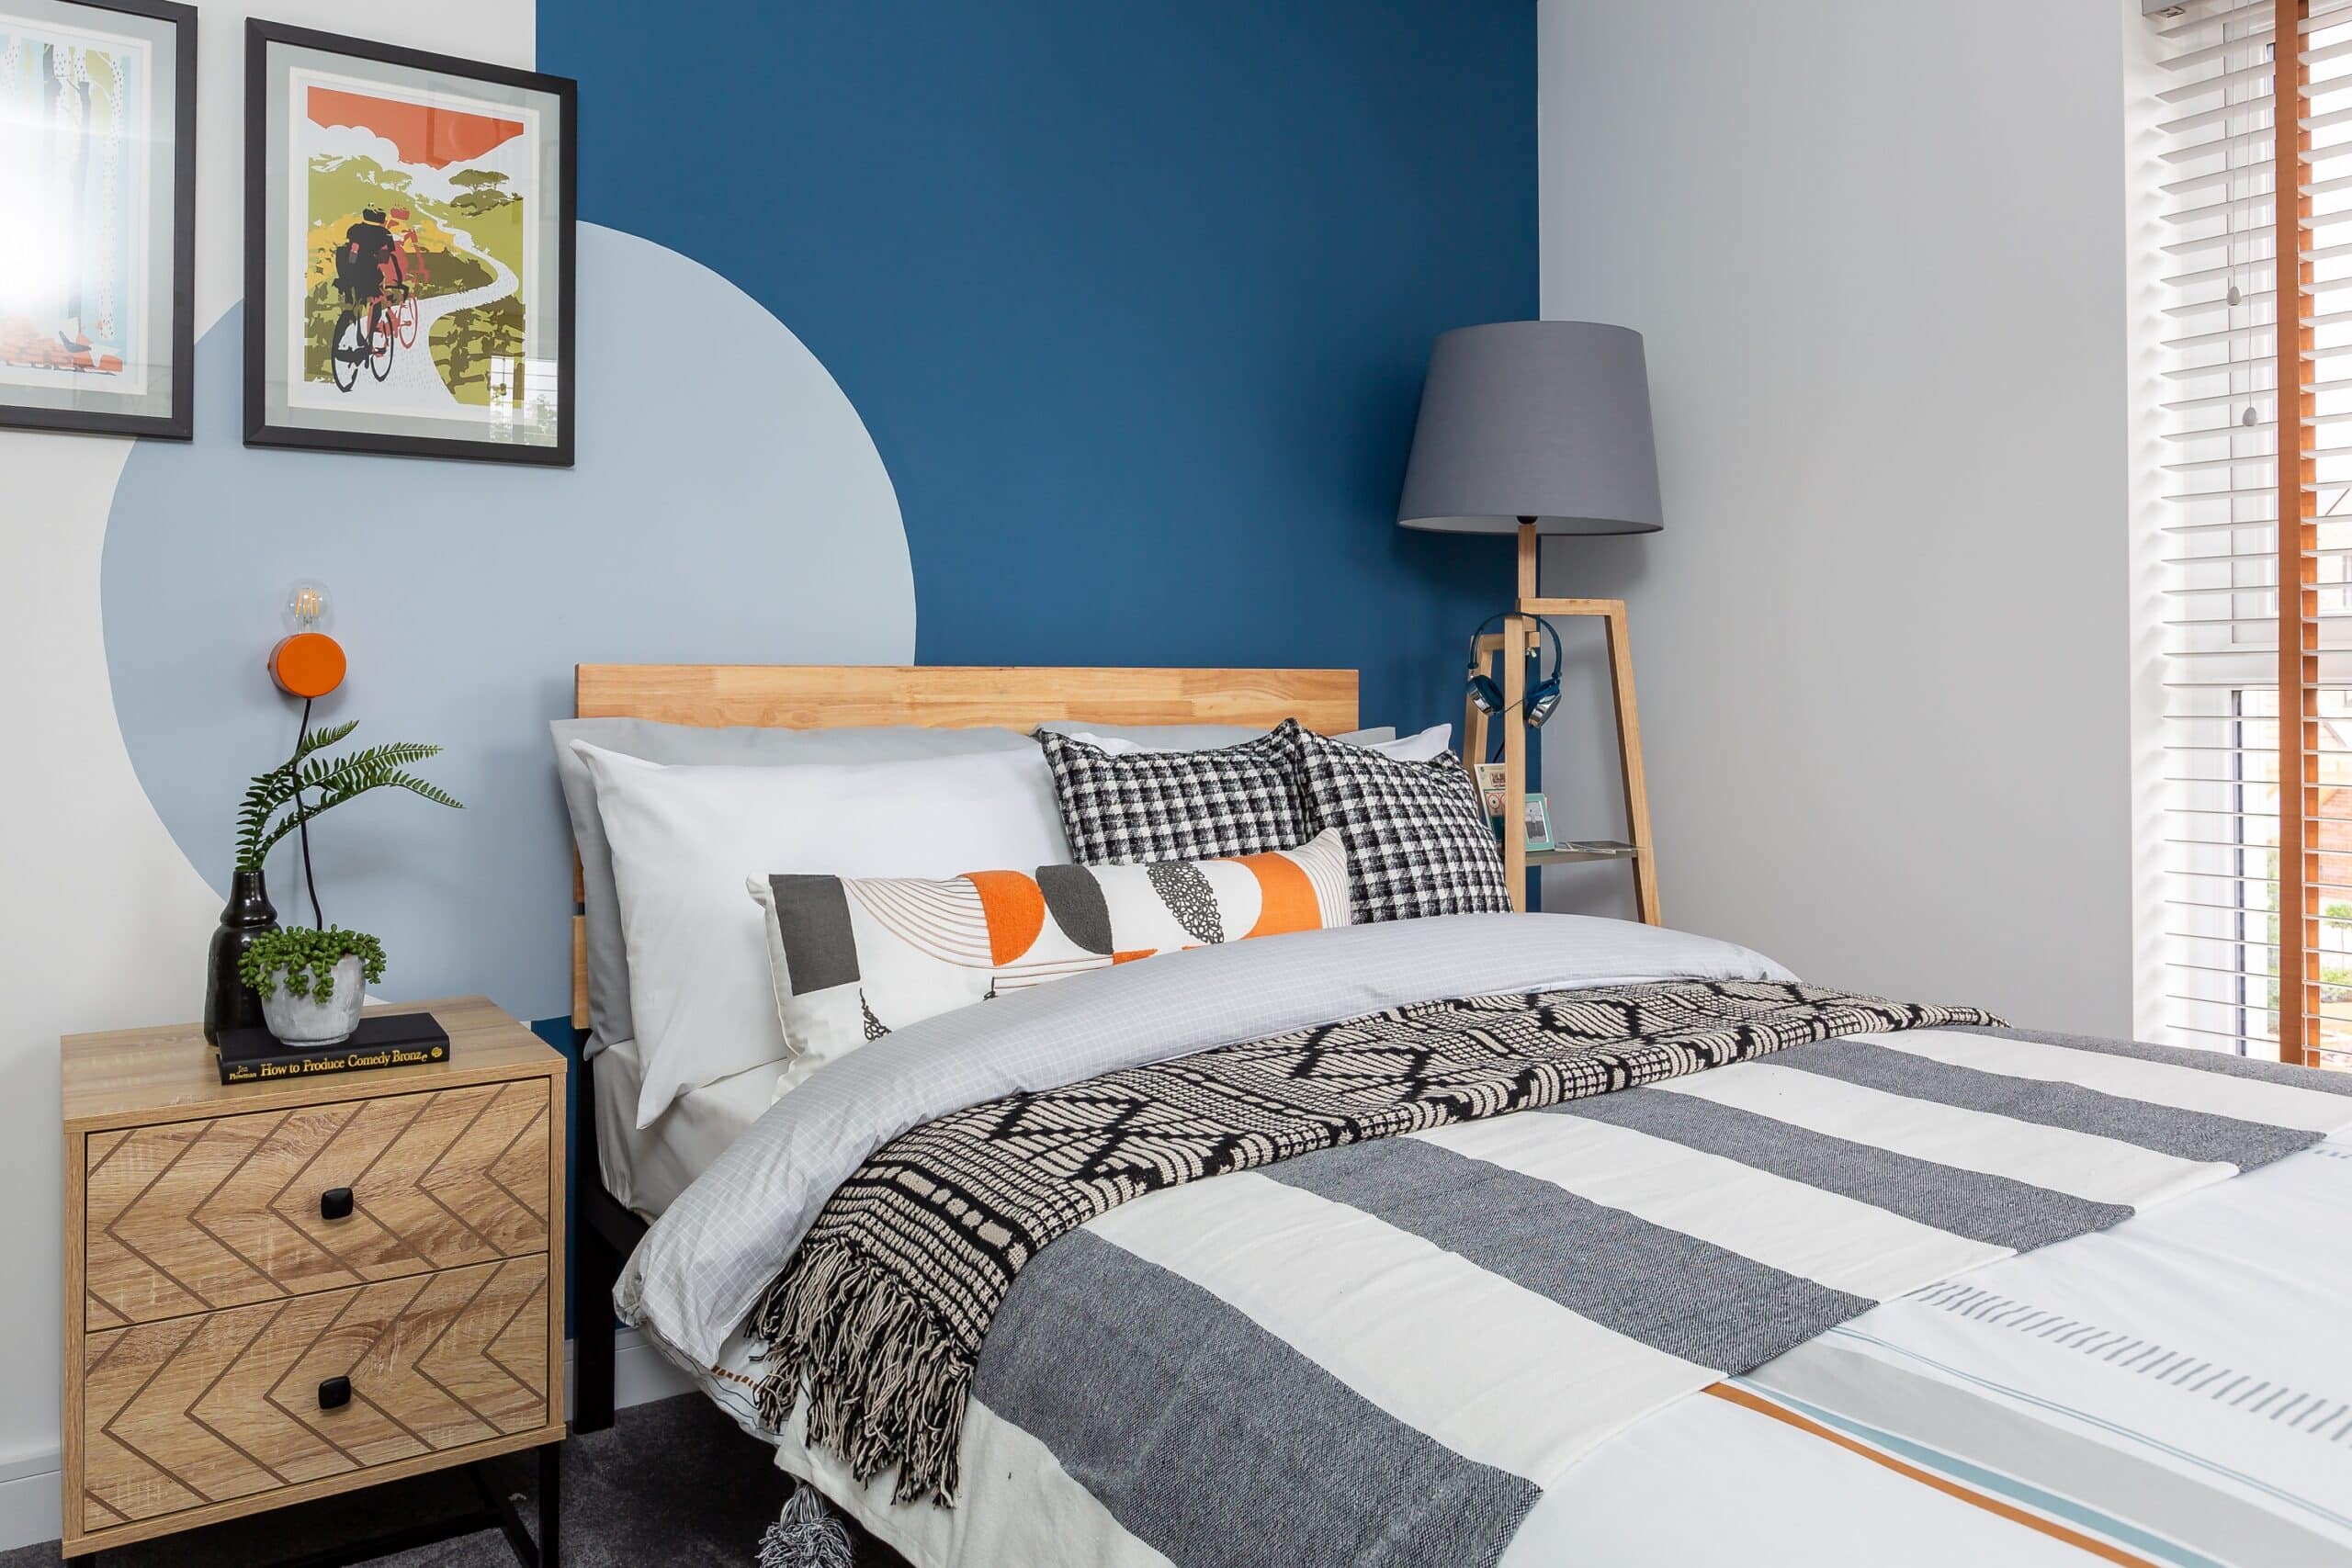 Internal show home photography of L&Q's The Arbour - Shared Ownership homes available on Share to Buy